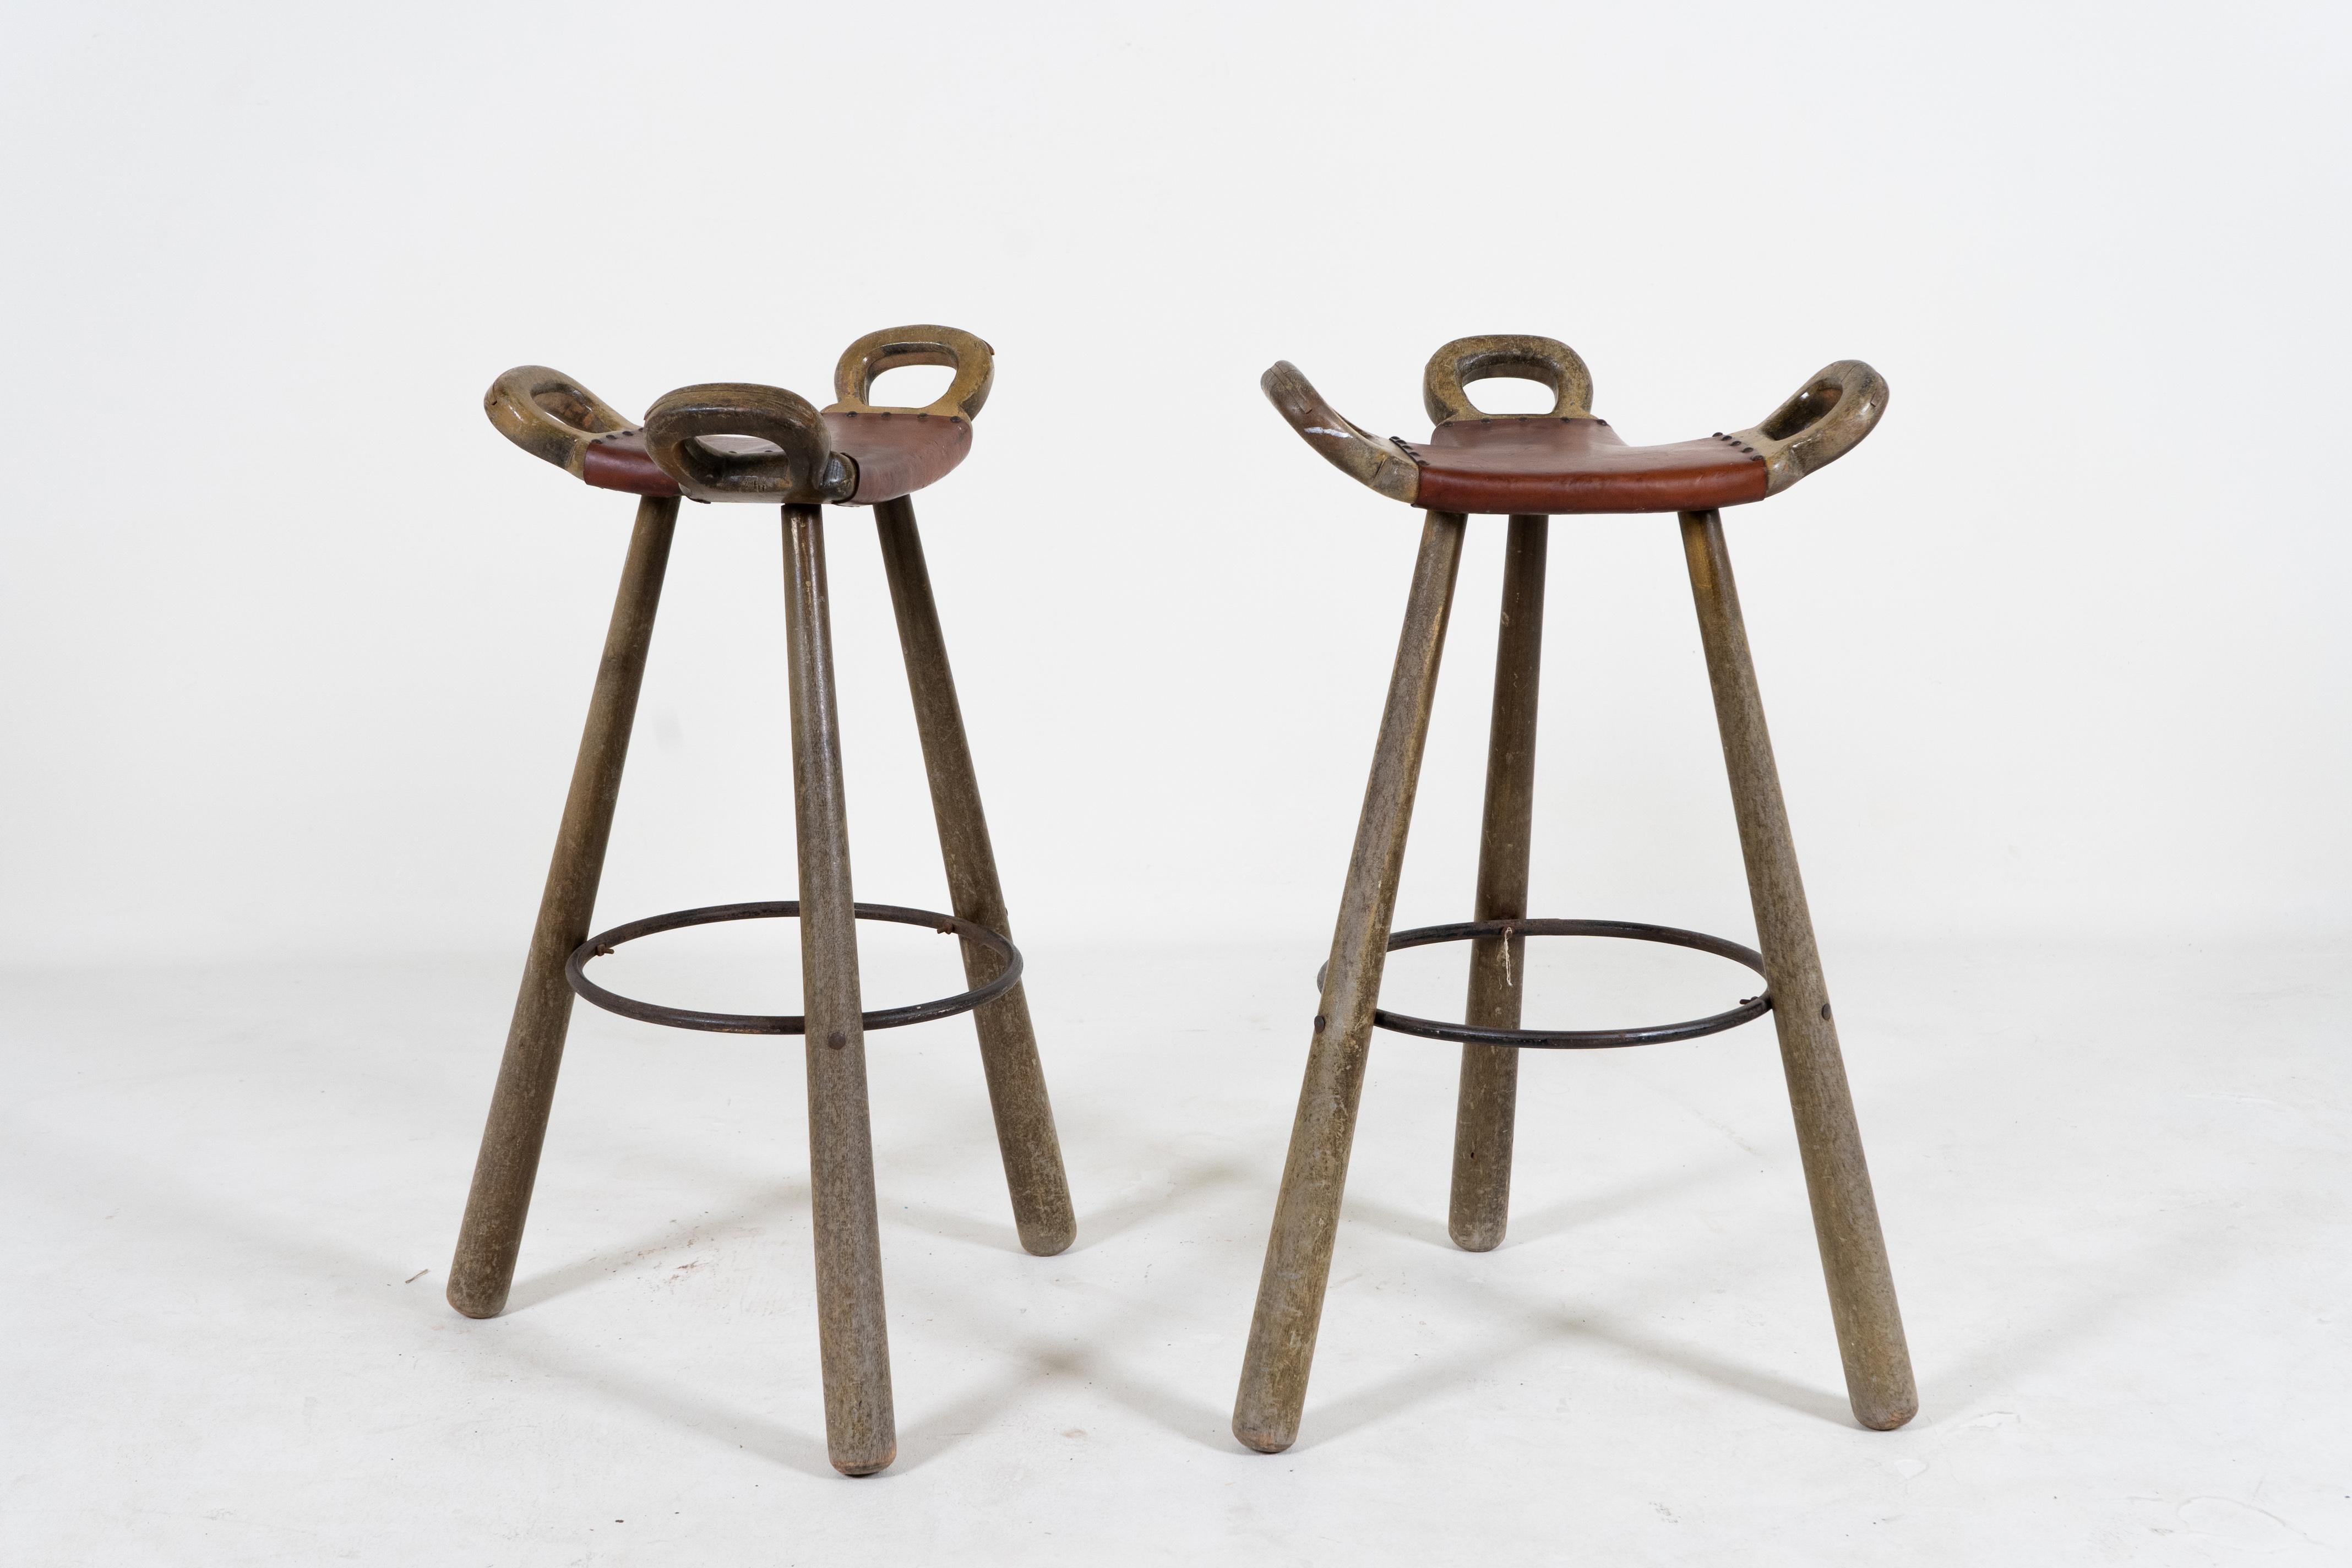 Scandinavian modern bar stools by Carl Malmsten, made in 1950s Sweden. Embodying the essence of Nordic mid-century aesthetics, these stools combine sturdy solid beech construction and rounded and organic shape with convenient handles. Painted steel